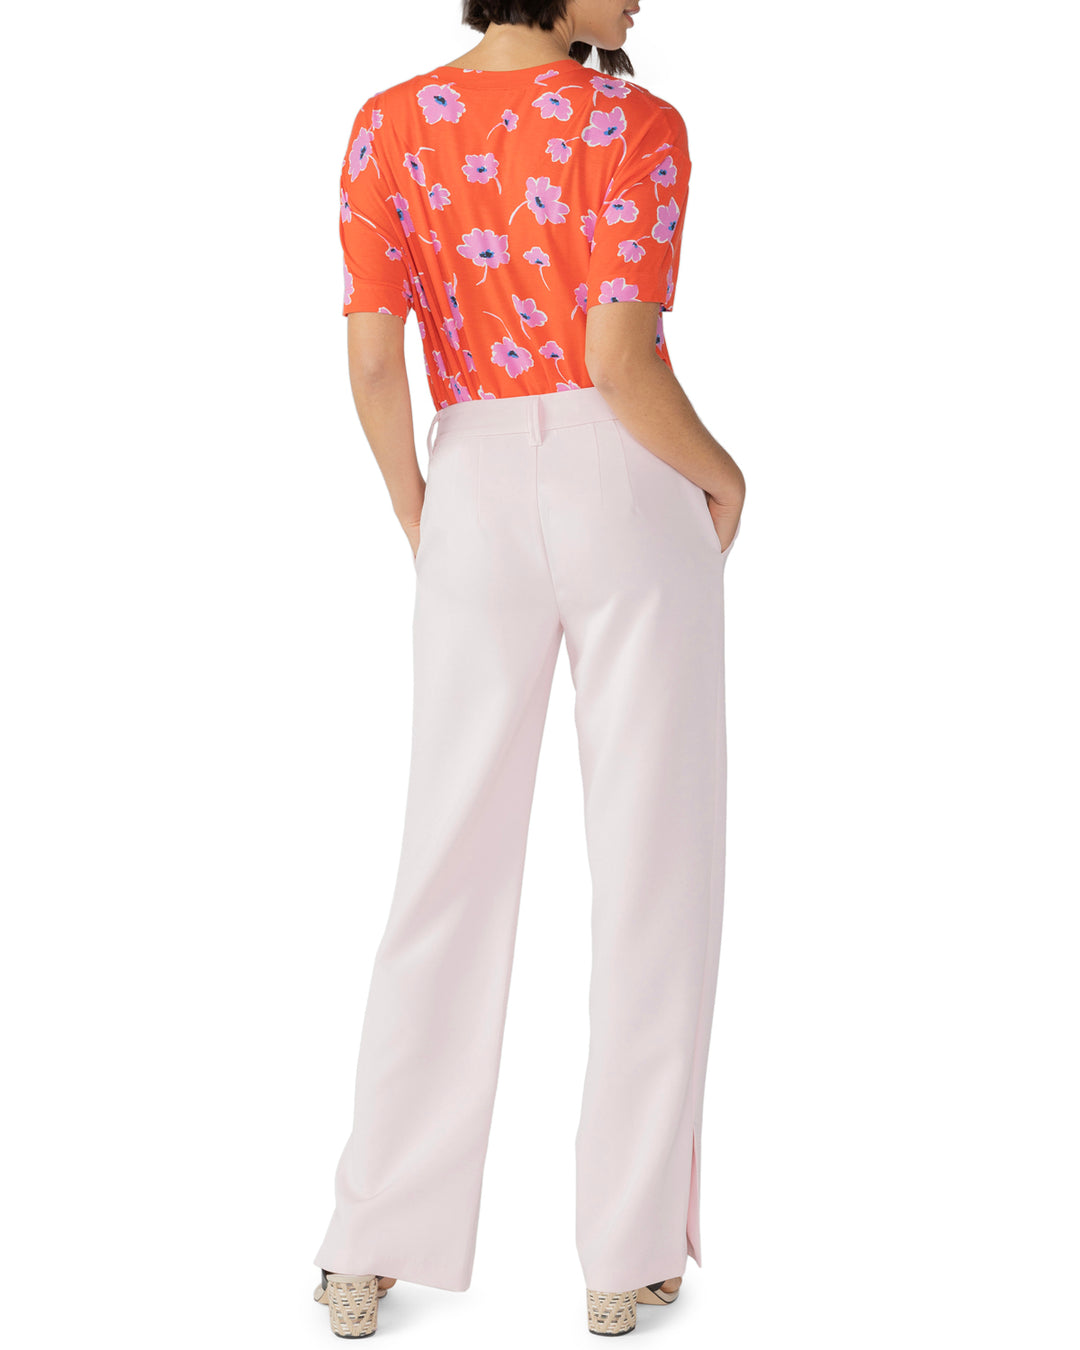 NOHO TROUSER PANT - WASHED PINK - Kingfisher Road - Online Boutique